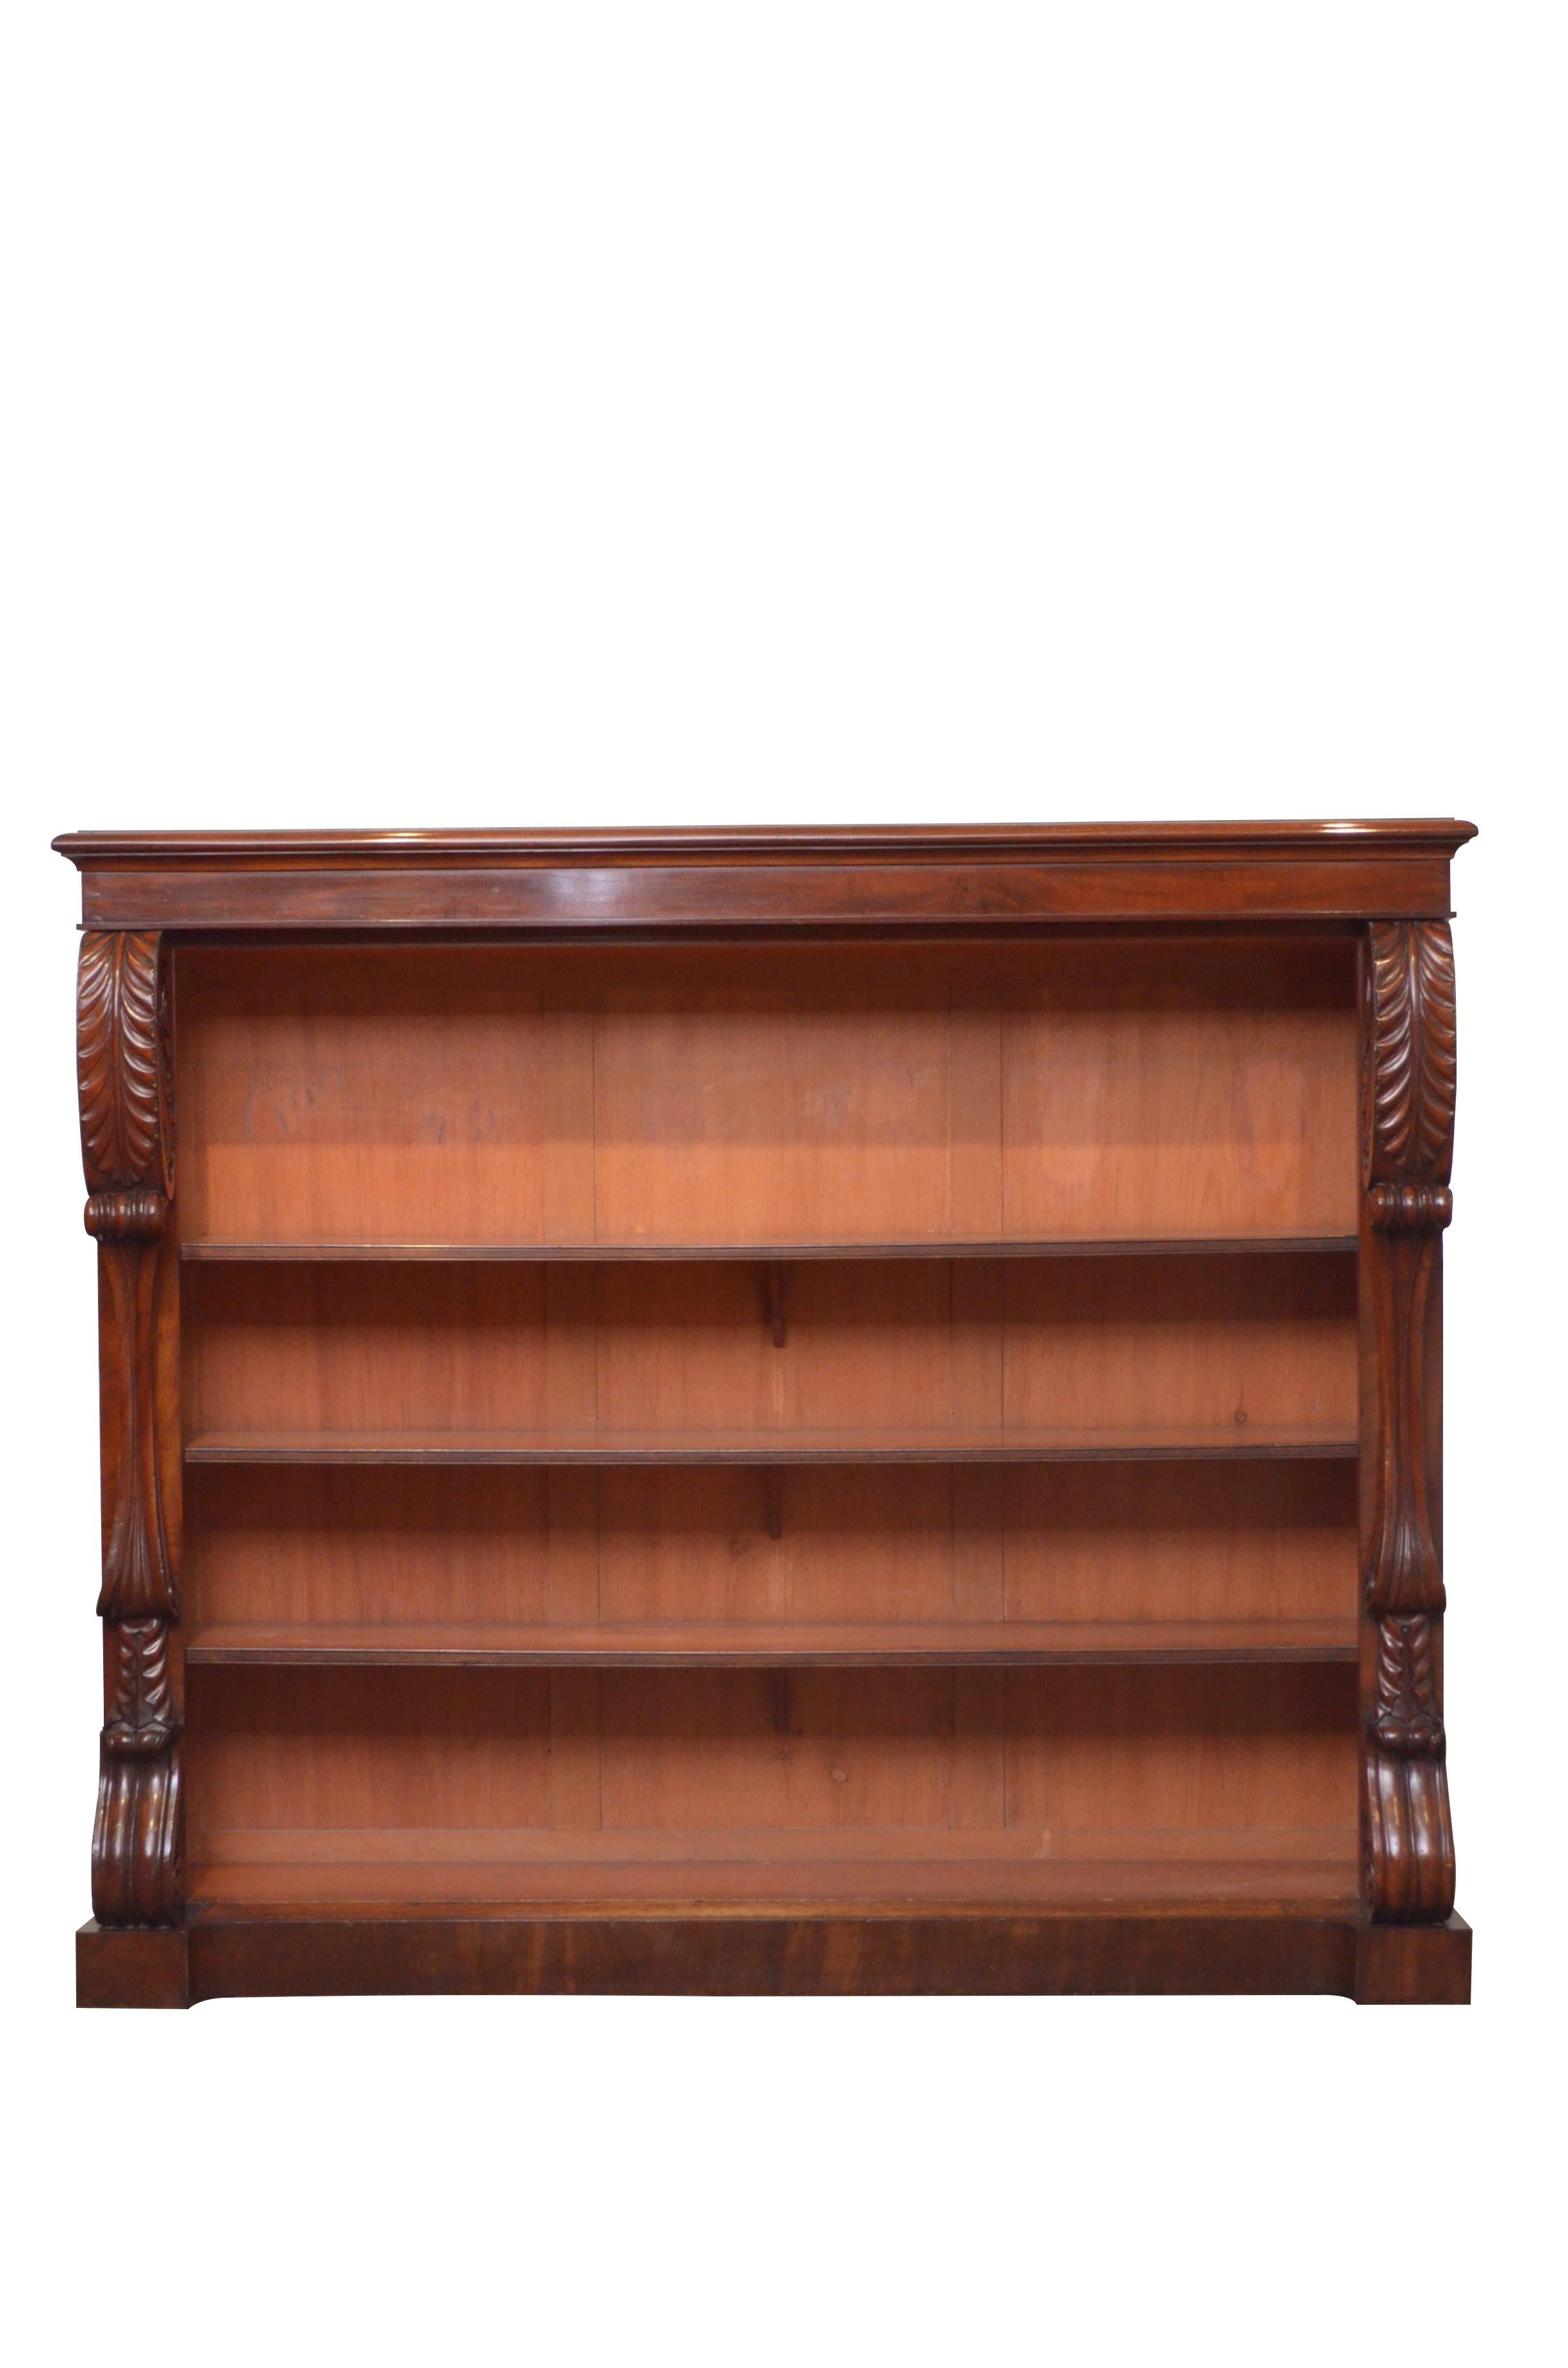 Imposing William IV Mahogany Open Bookcase In Good Condition For Sale In Whaley Bridge, GB